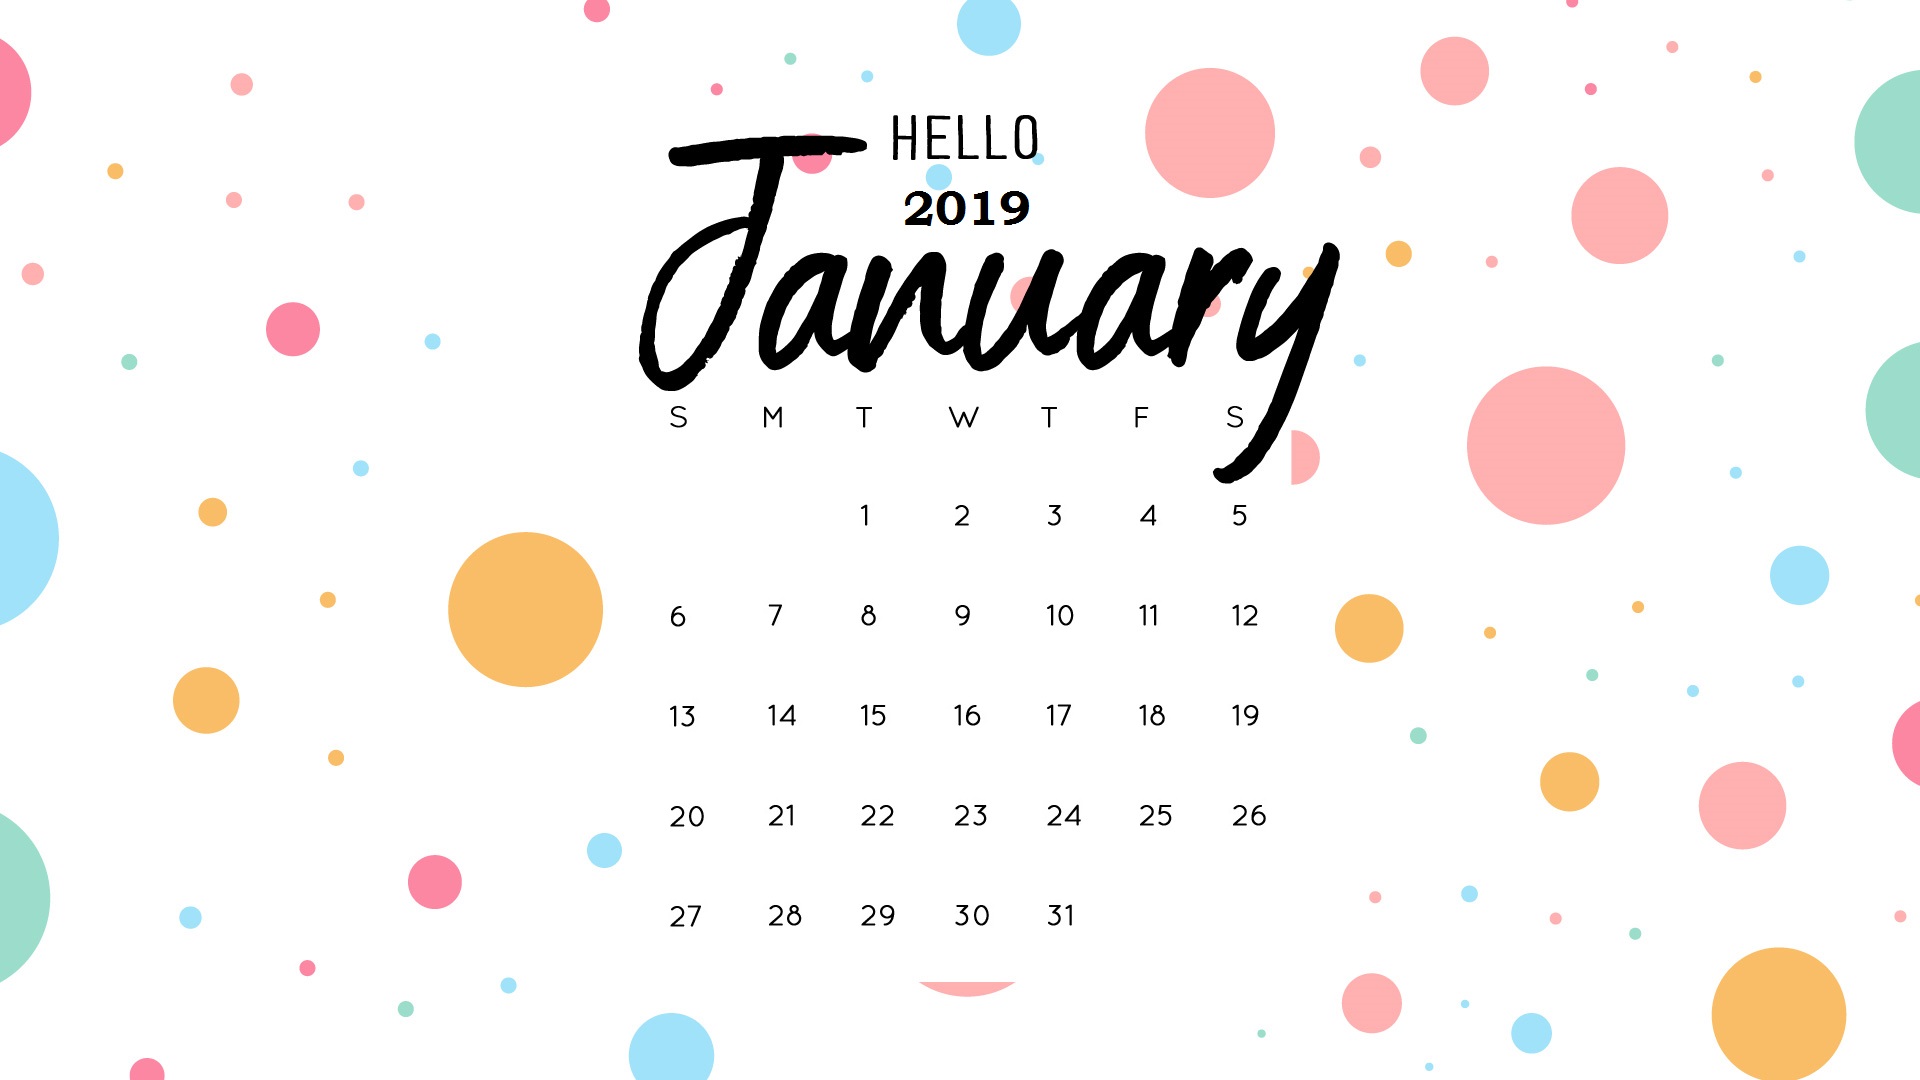 🔥 Download January Calendar Templates All About by jsalazar38 Cute